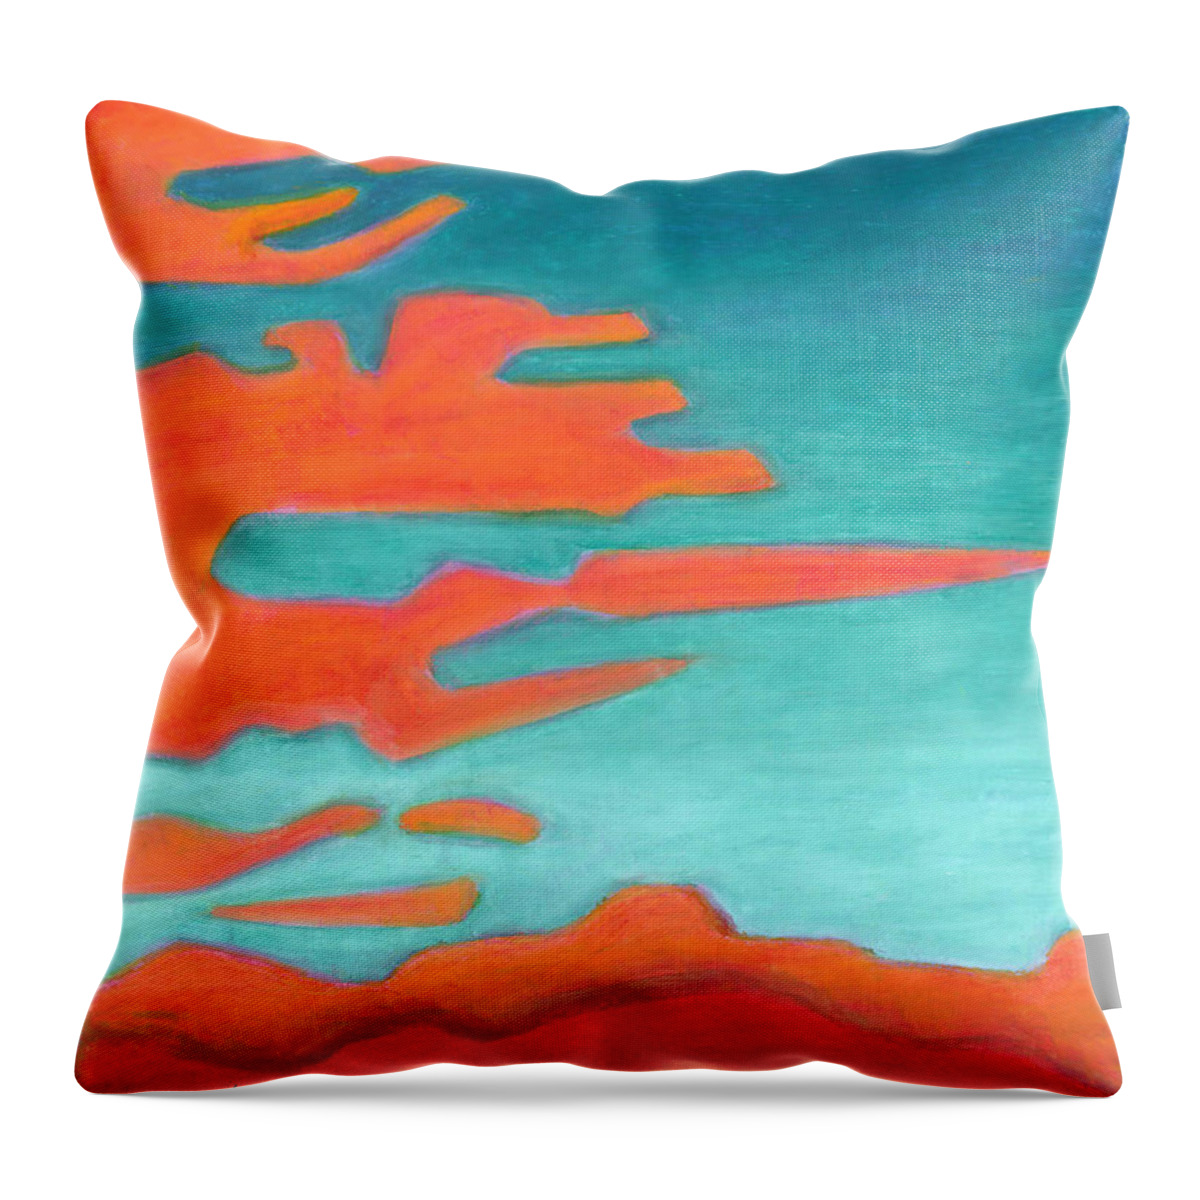 Landscape Throw Pillow featuring the painting Sunrise Pursuit by Carrie MaKenna